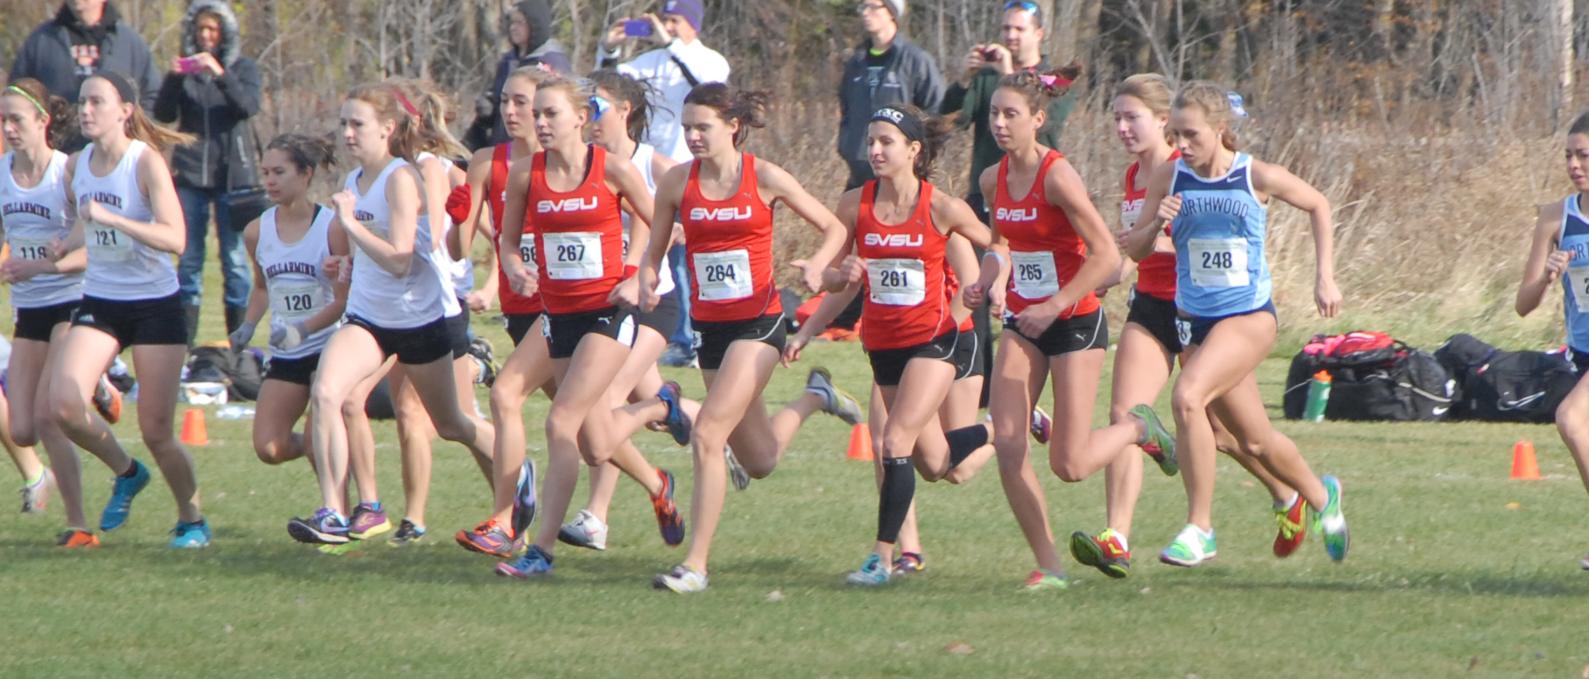 Women's Cross Country Team Heads To Nationals